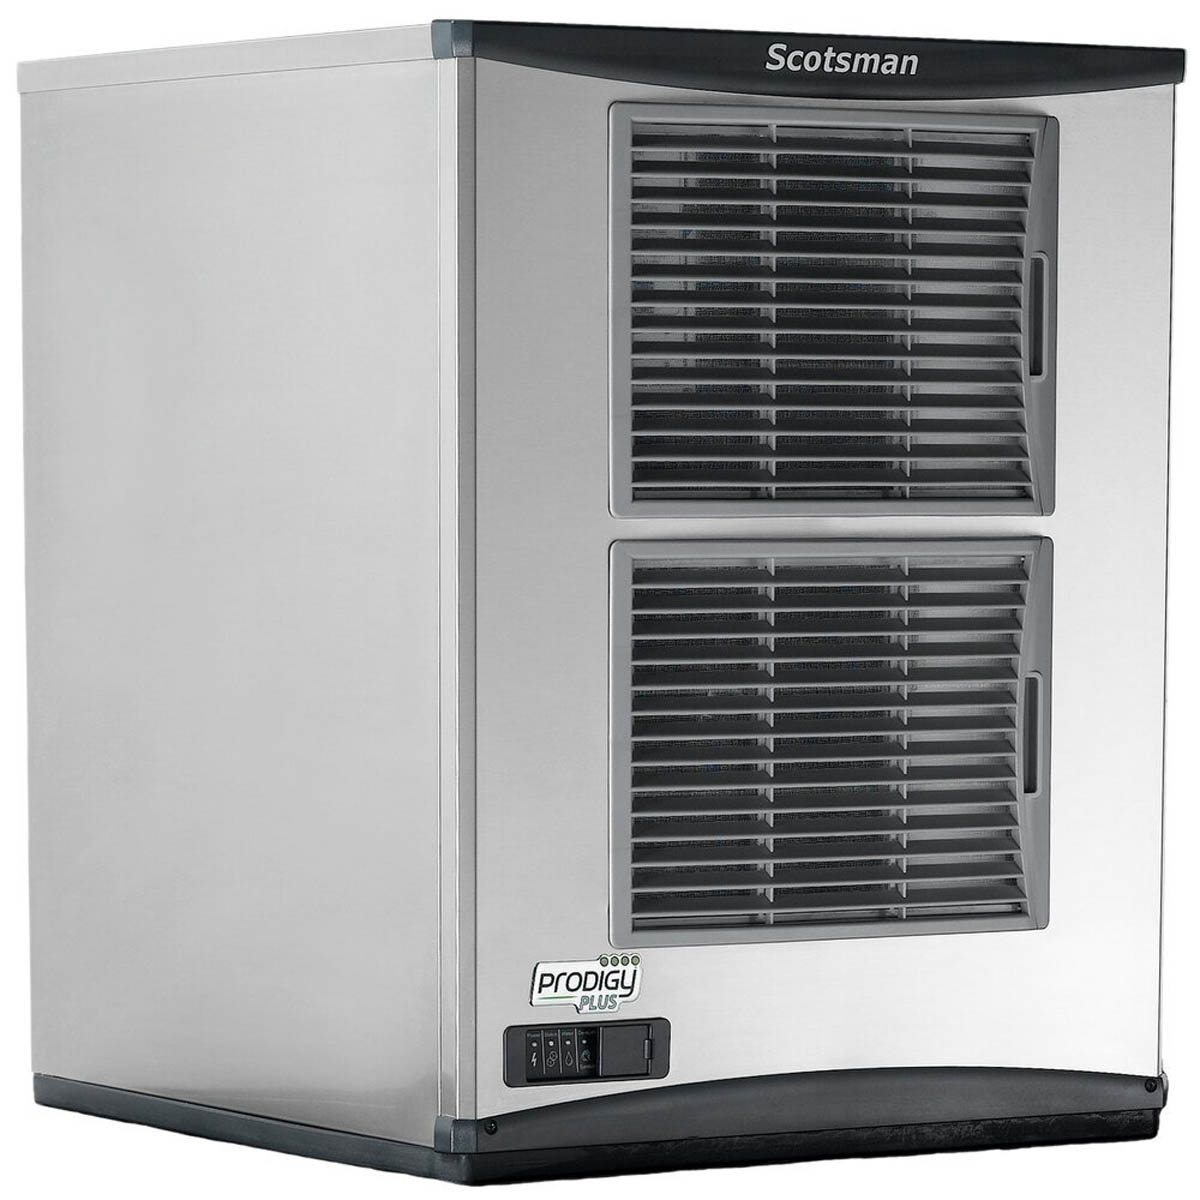 Scotsman NS0922A-1 Prodigy Plus Nugget Ice Machine, Chef's Deal